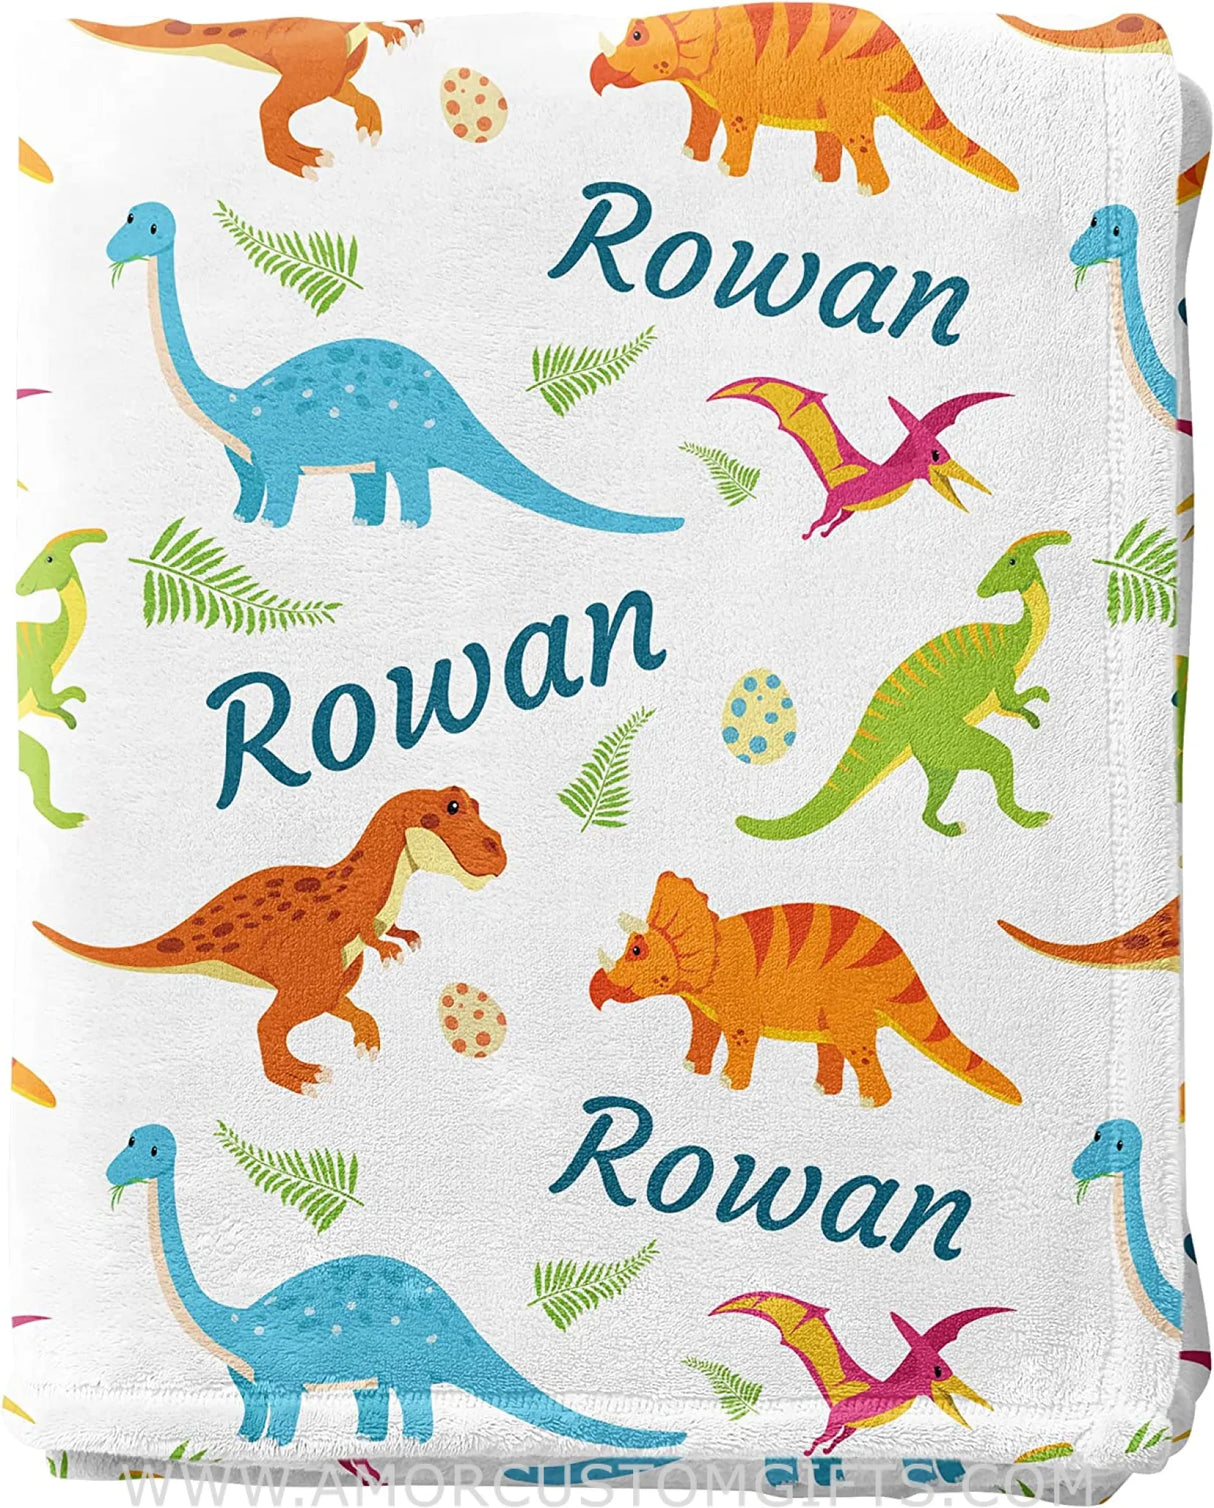 Blankets USA MADE Personalized Baby Blankets for Boys with Name and Dinosaurs - Custom Blankets for Baby Shower